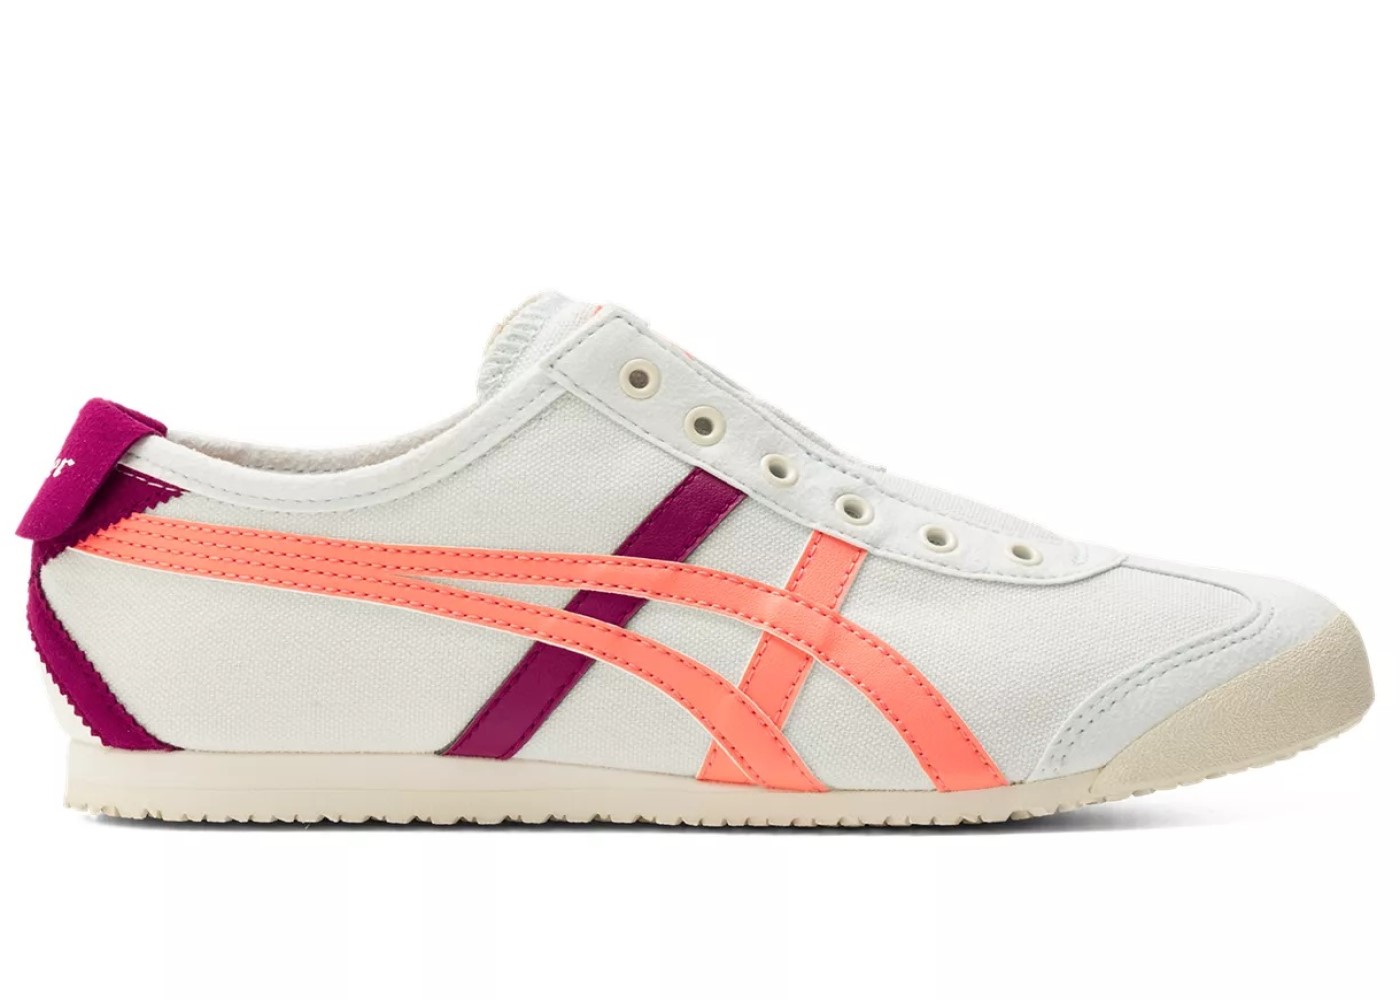 Onitsuka Tiger Mexico 66 Slip-On Airy Blue Guava